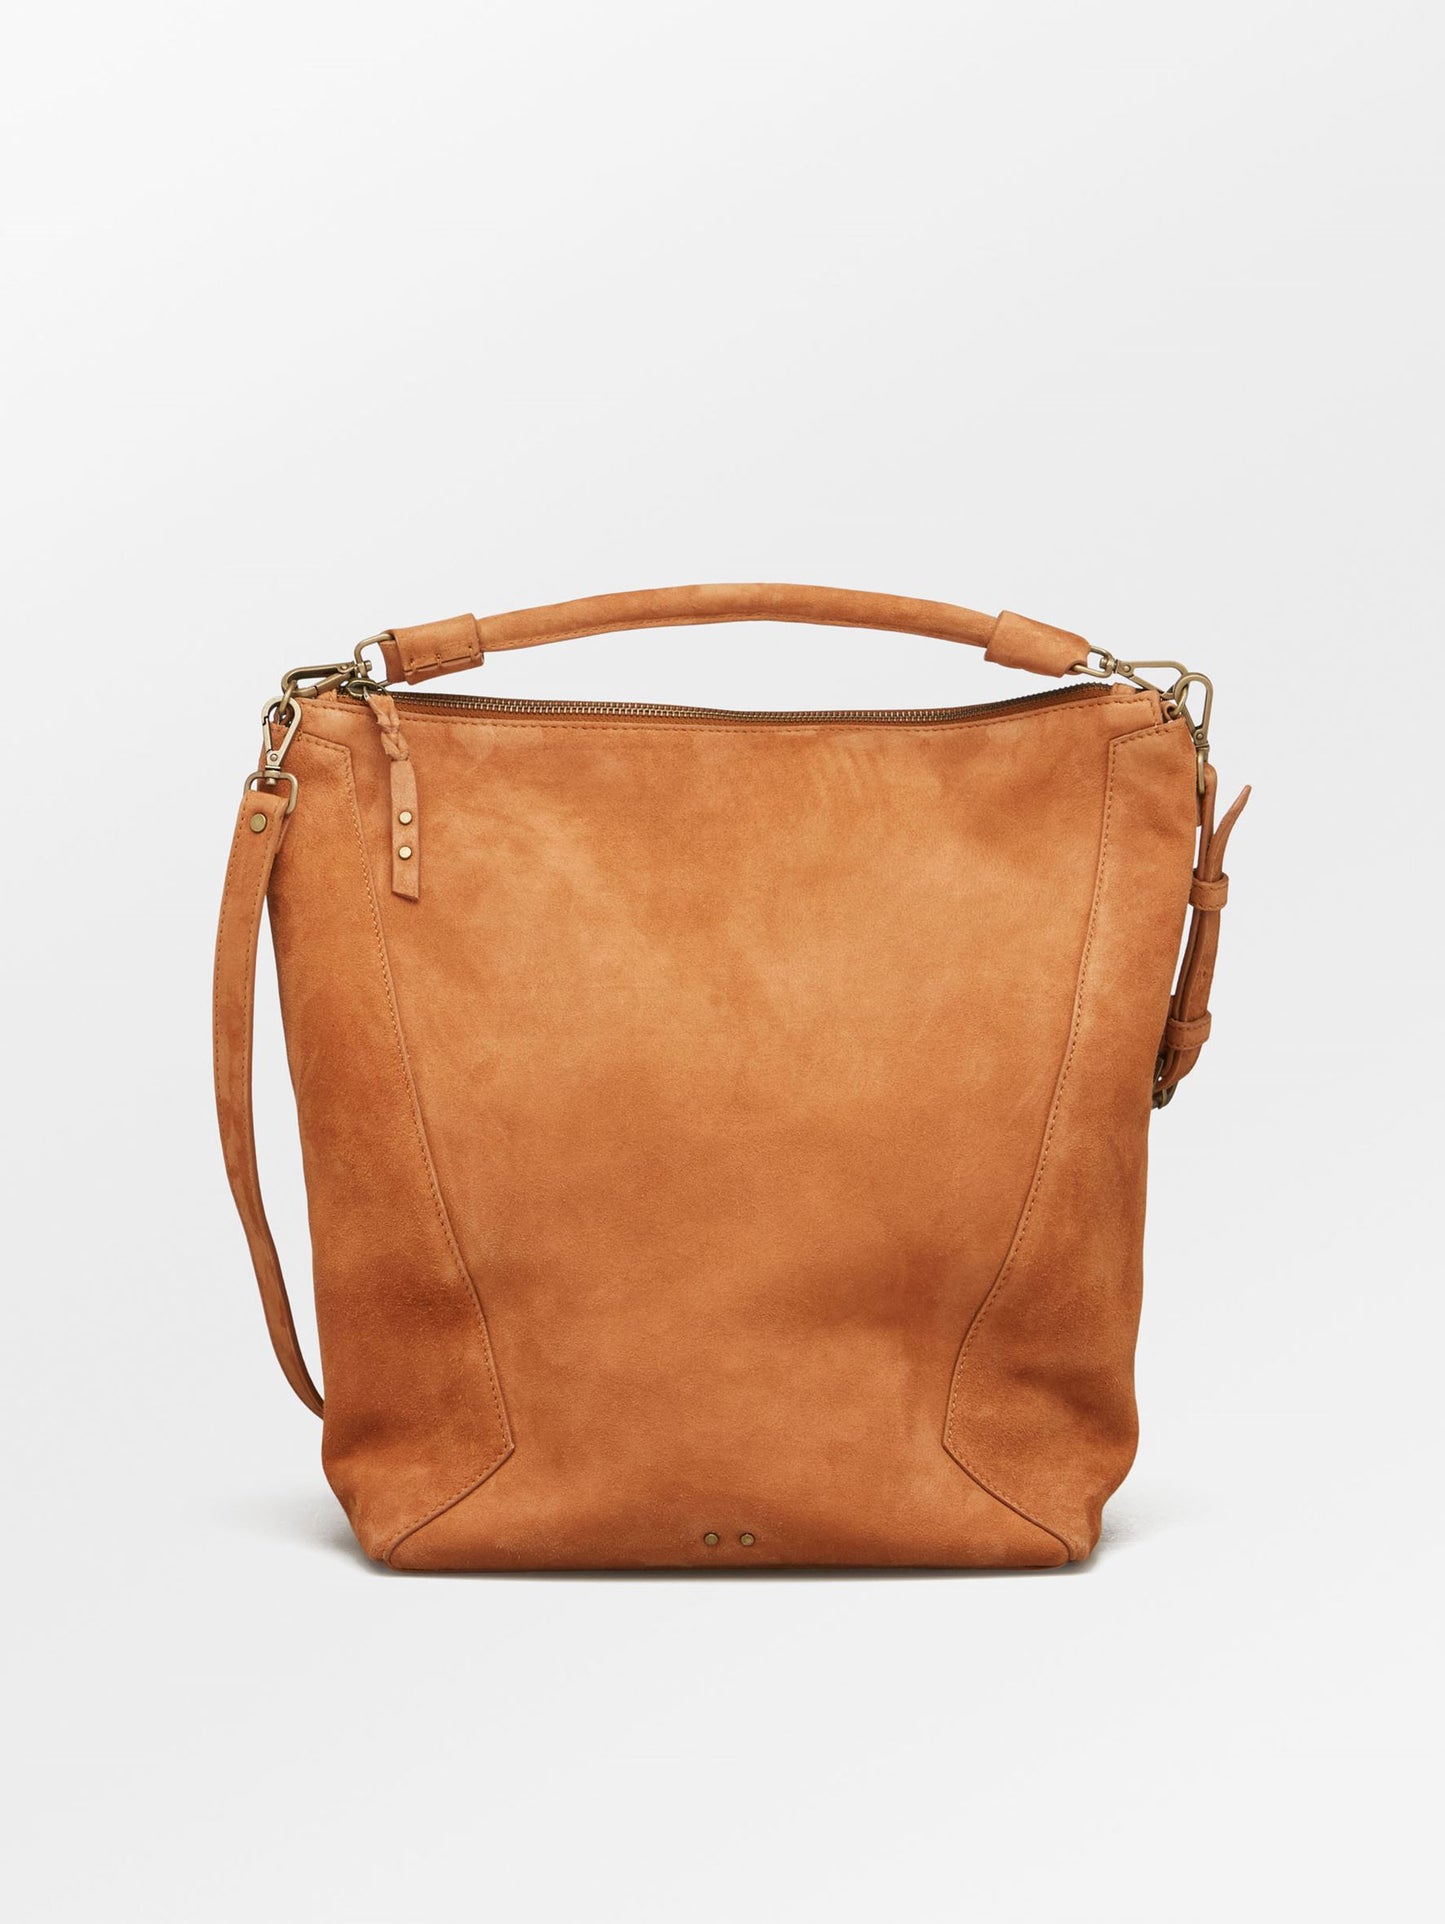 Becksöndergaard, Suede Everly Bag - Leather Brown, archive, archive, sale, sale